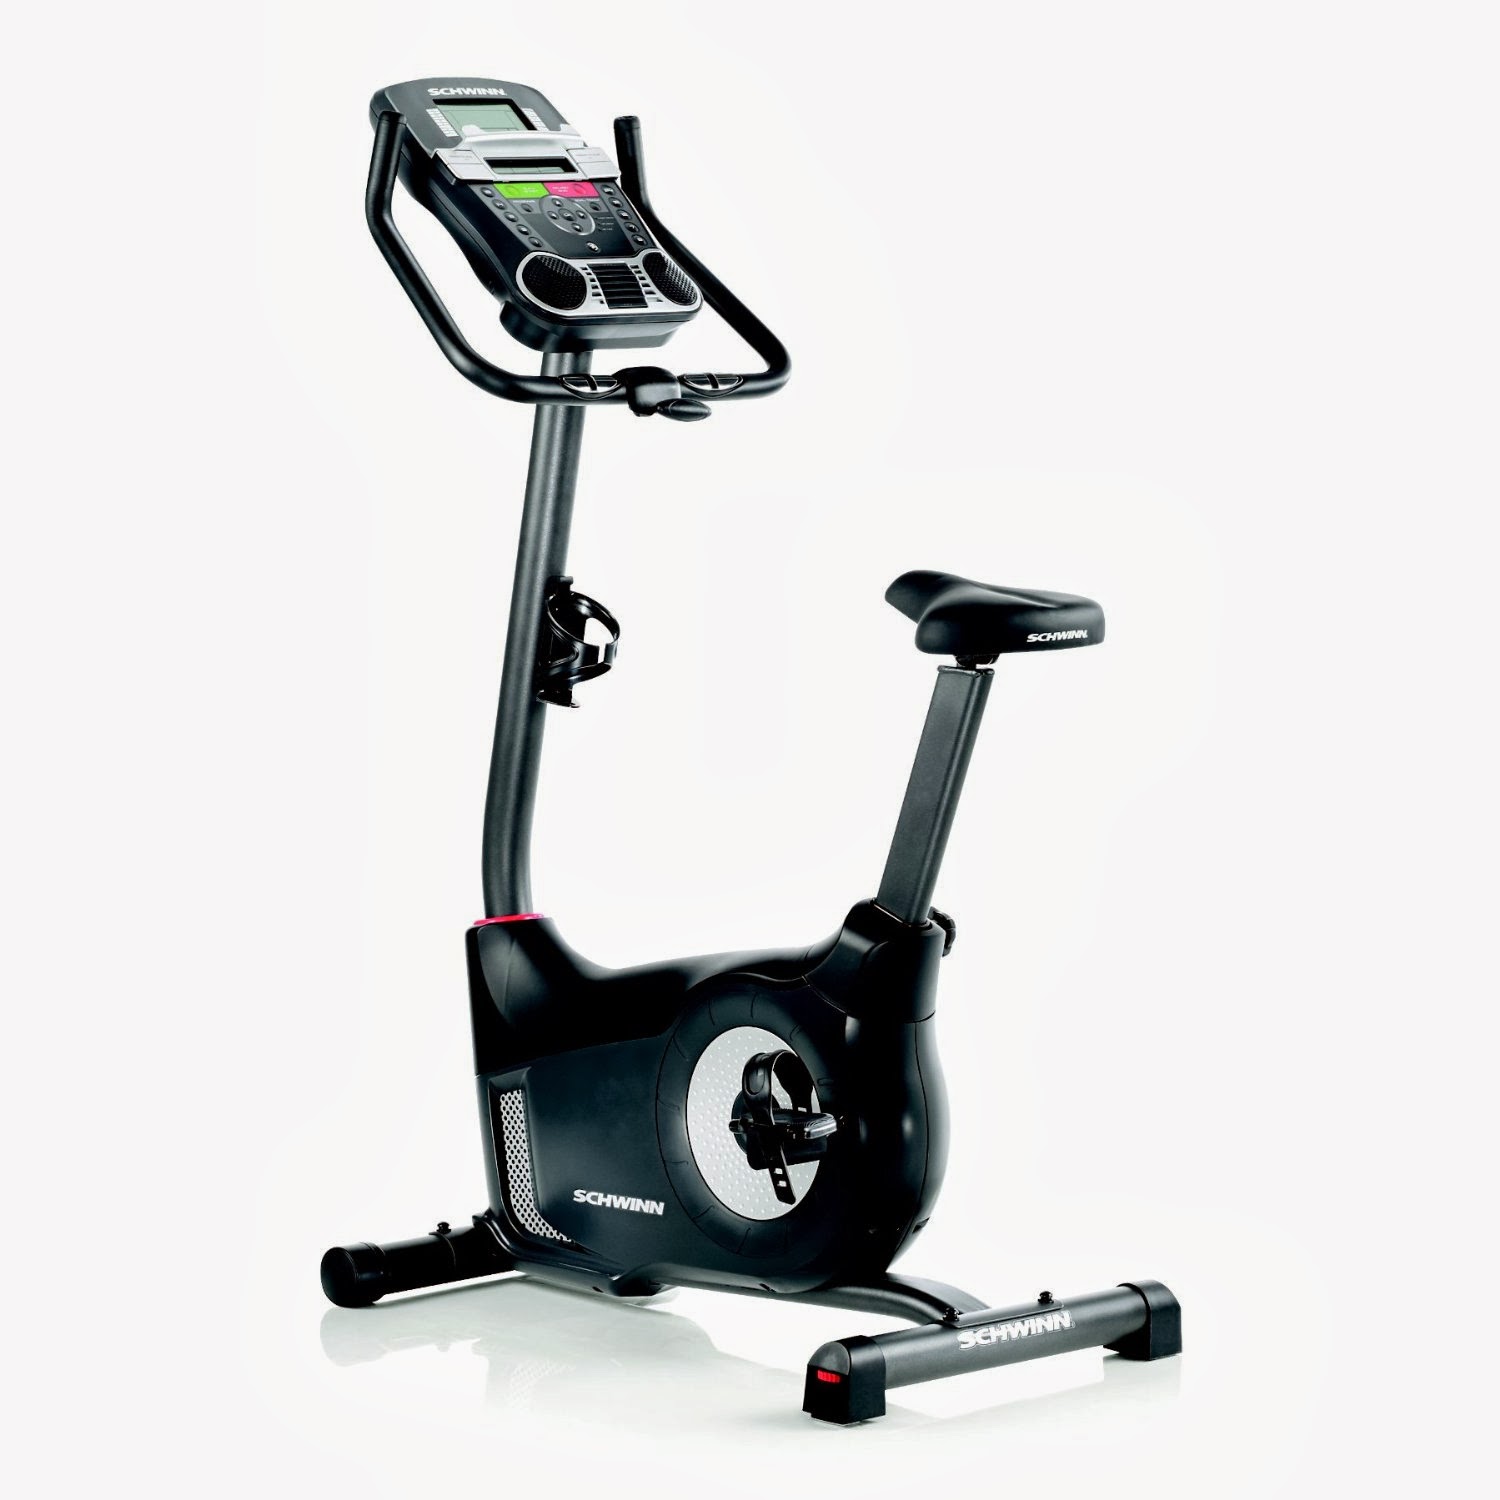 Upright exercise bikes reviewed, see features, comparisons, differences, prices